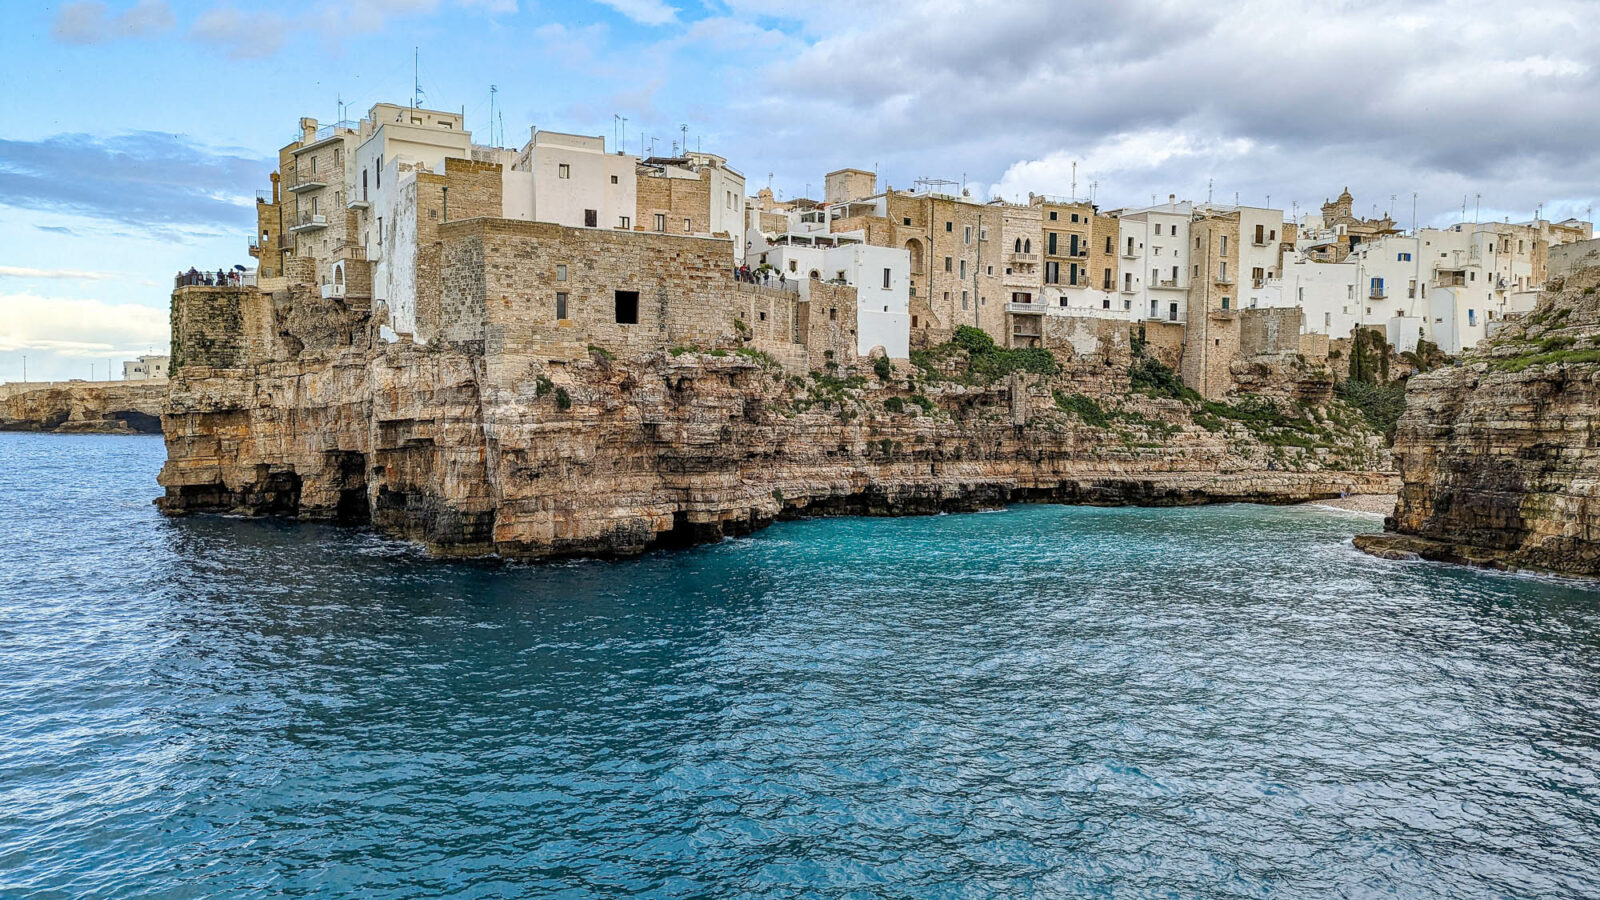 white and tan buildings on a cliff over a turquoise ocean